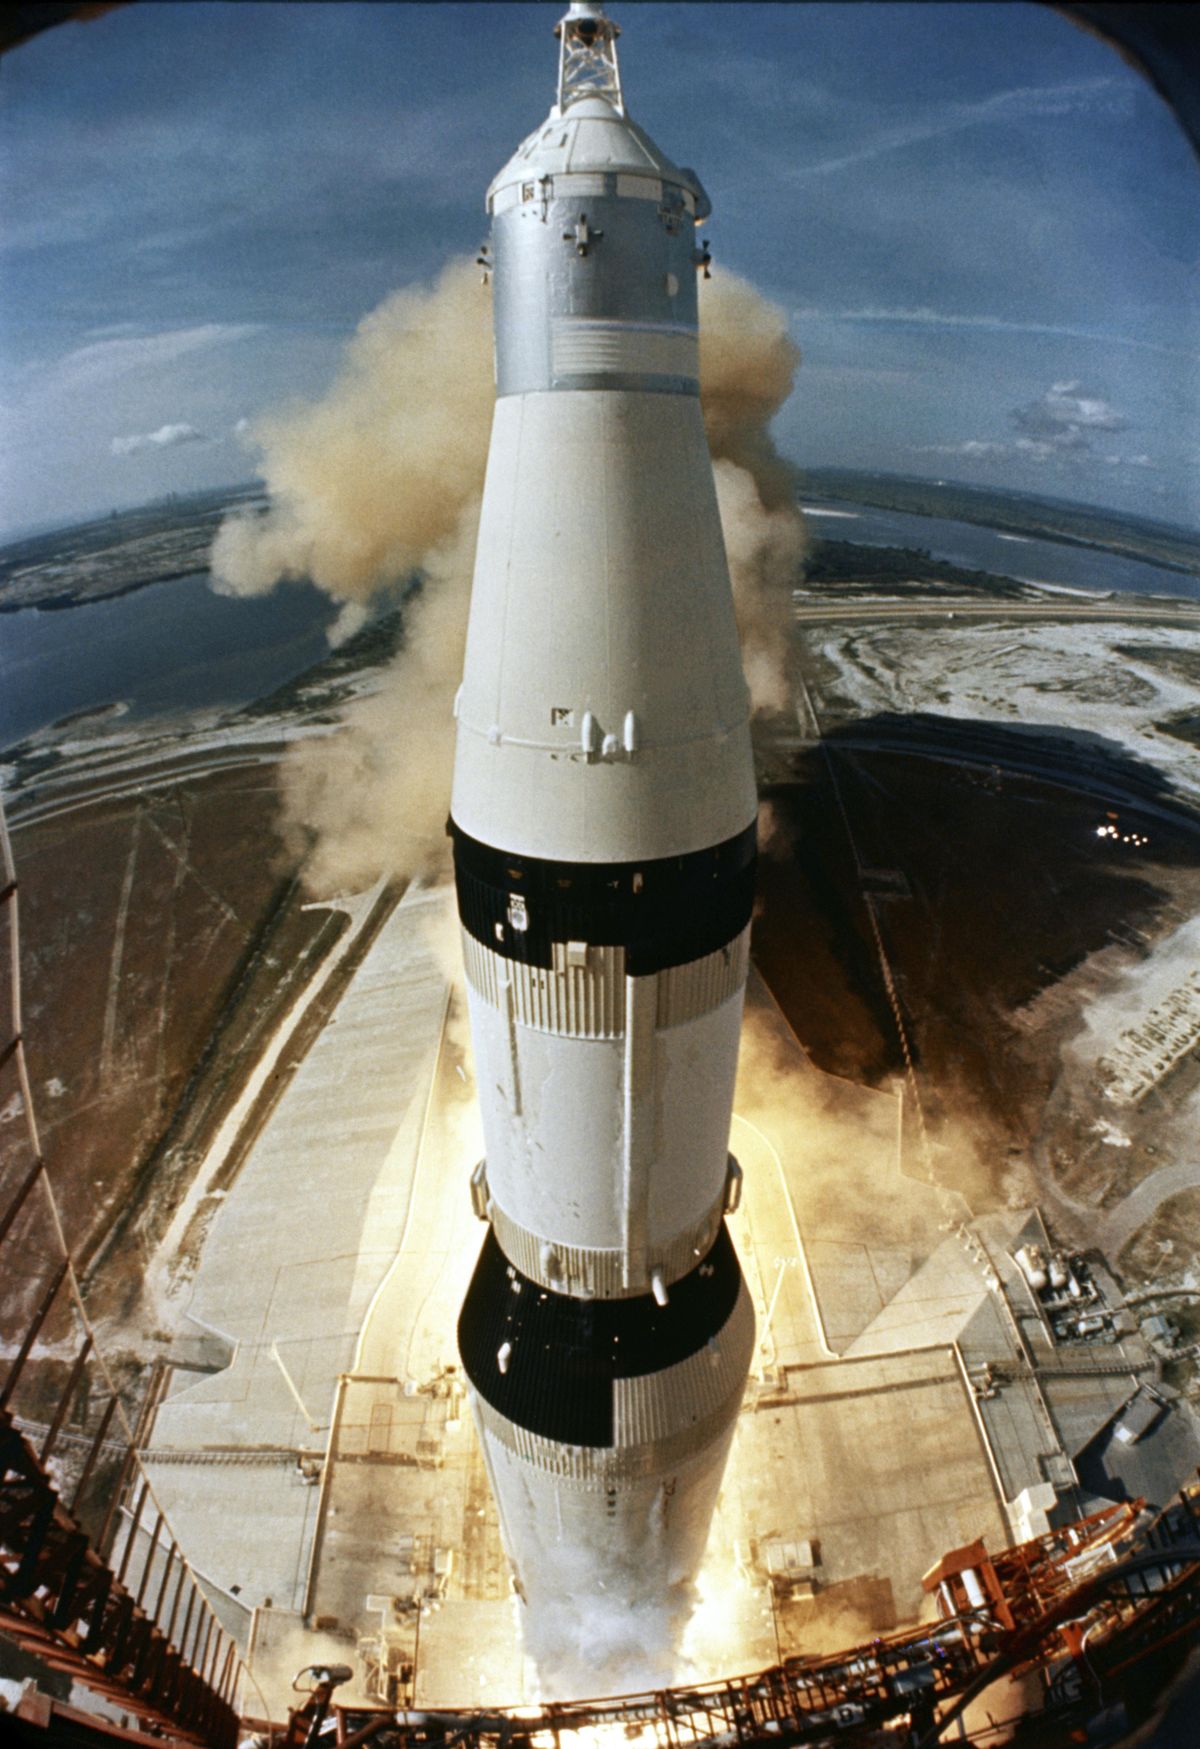 The Saturn V rocket launches from the Kennedy Space Center in this July 1969 photo from NASA. Researchers at WSU received a contract from NASA in the 1960s to conduct research on a water system intended to deaden the roar of the five jet engines that thrust the rocket into the atmosphere. (AP)